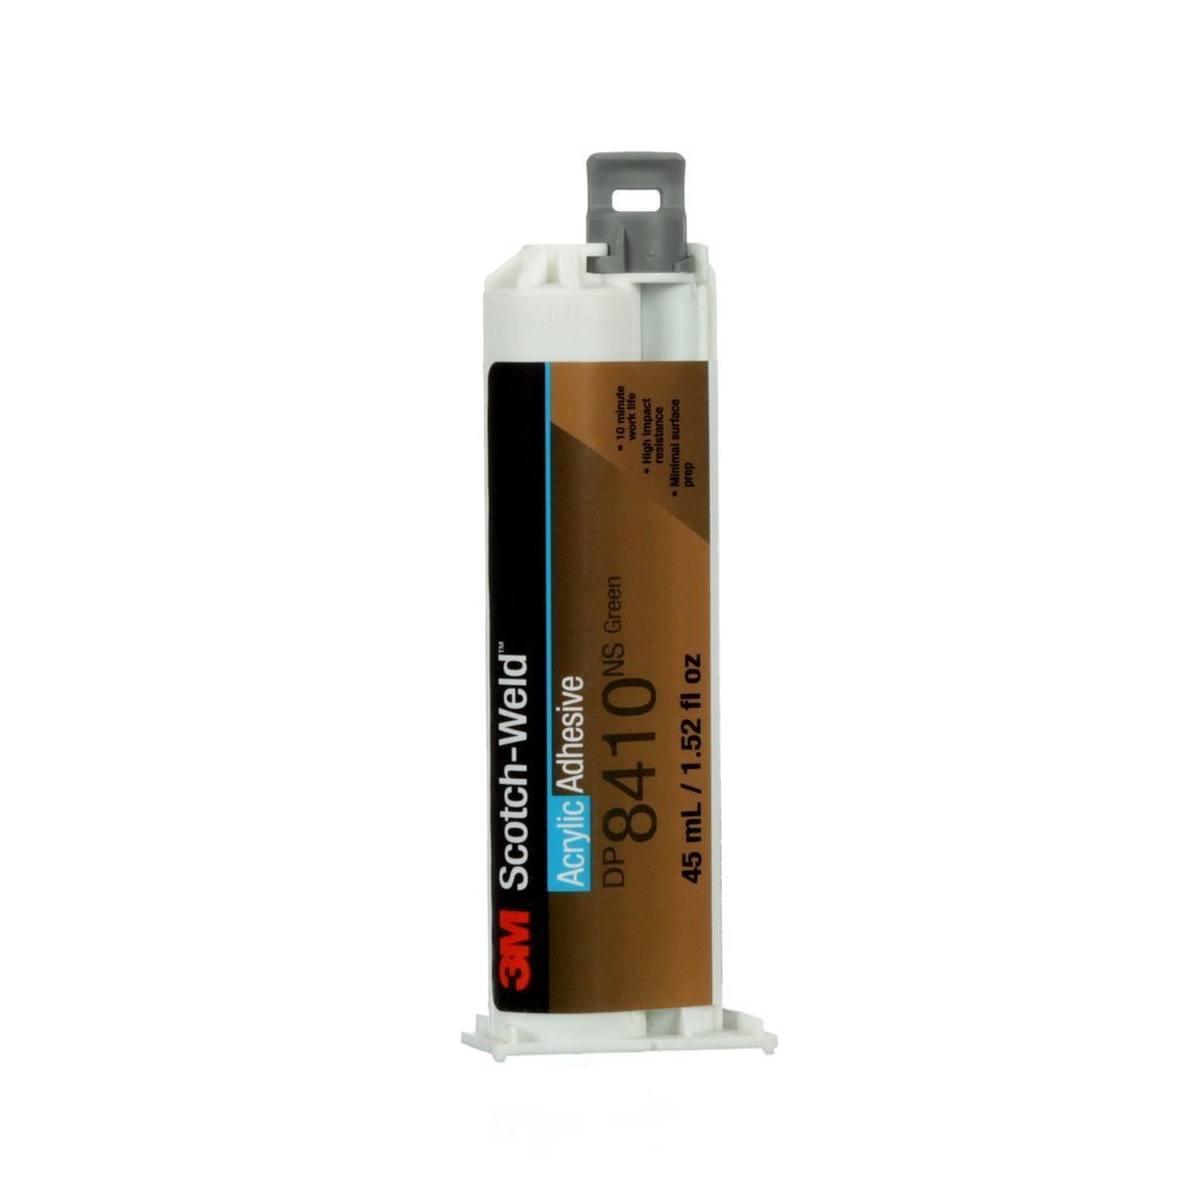 3M Scotch-Weld 2-component acrylate-based construction adhesive for the EPX System DP 8410 NS, green, 45 ml